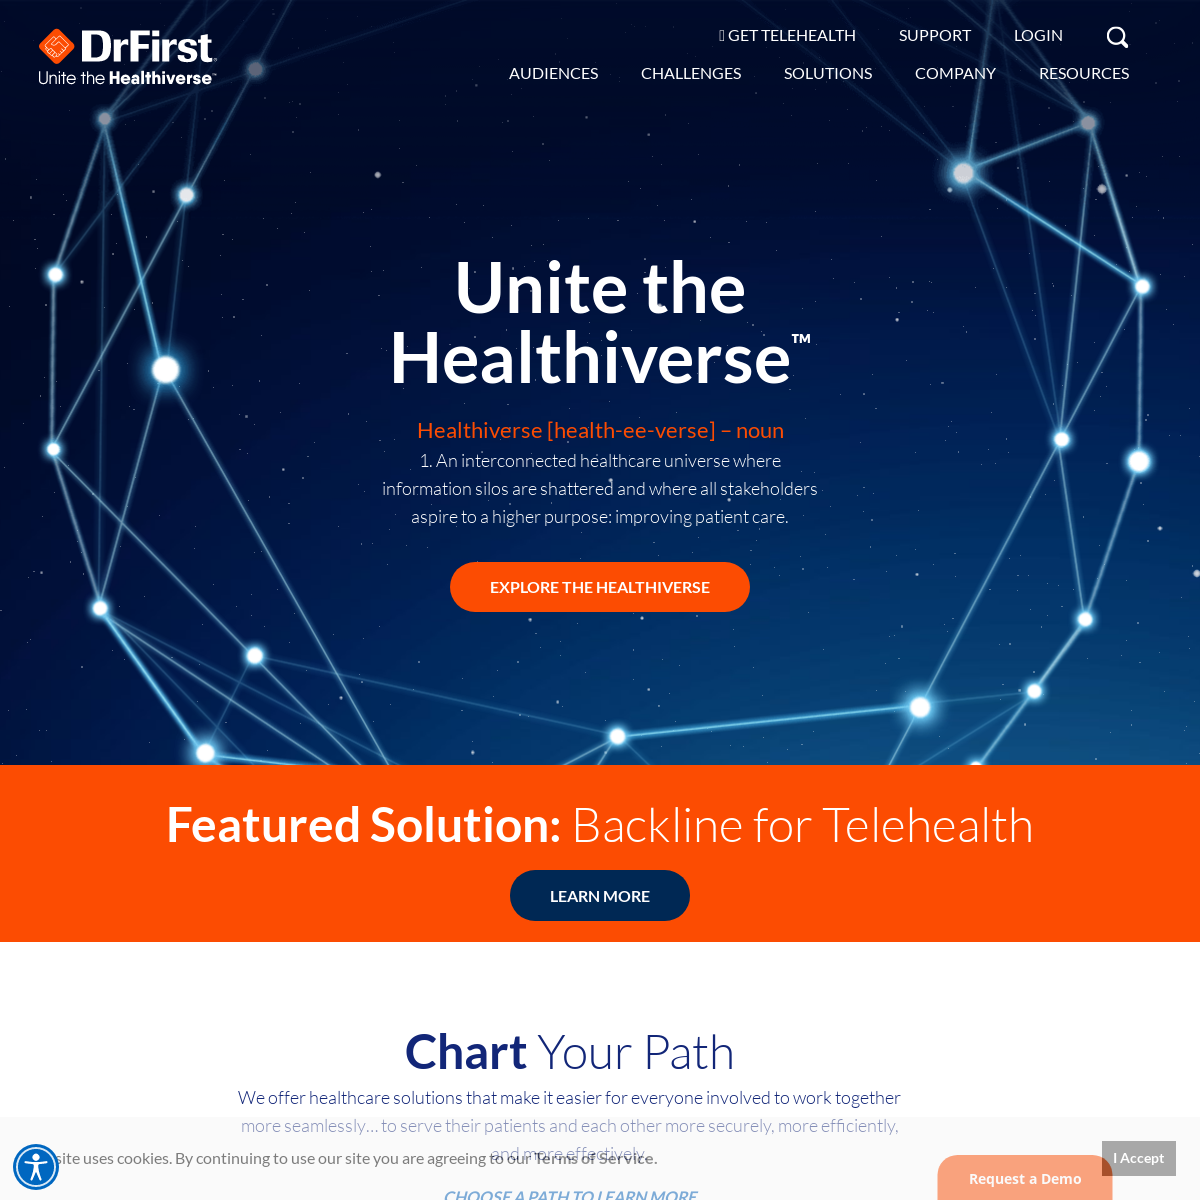 A complete backup of drfirst.com